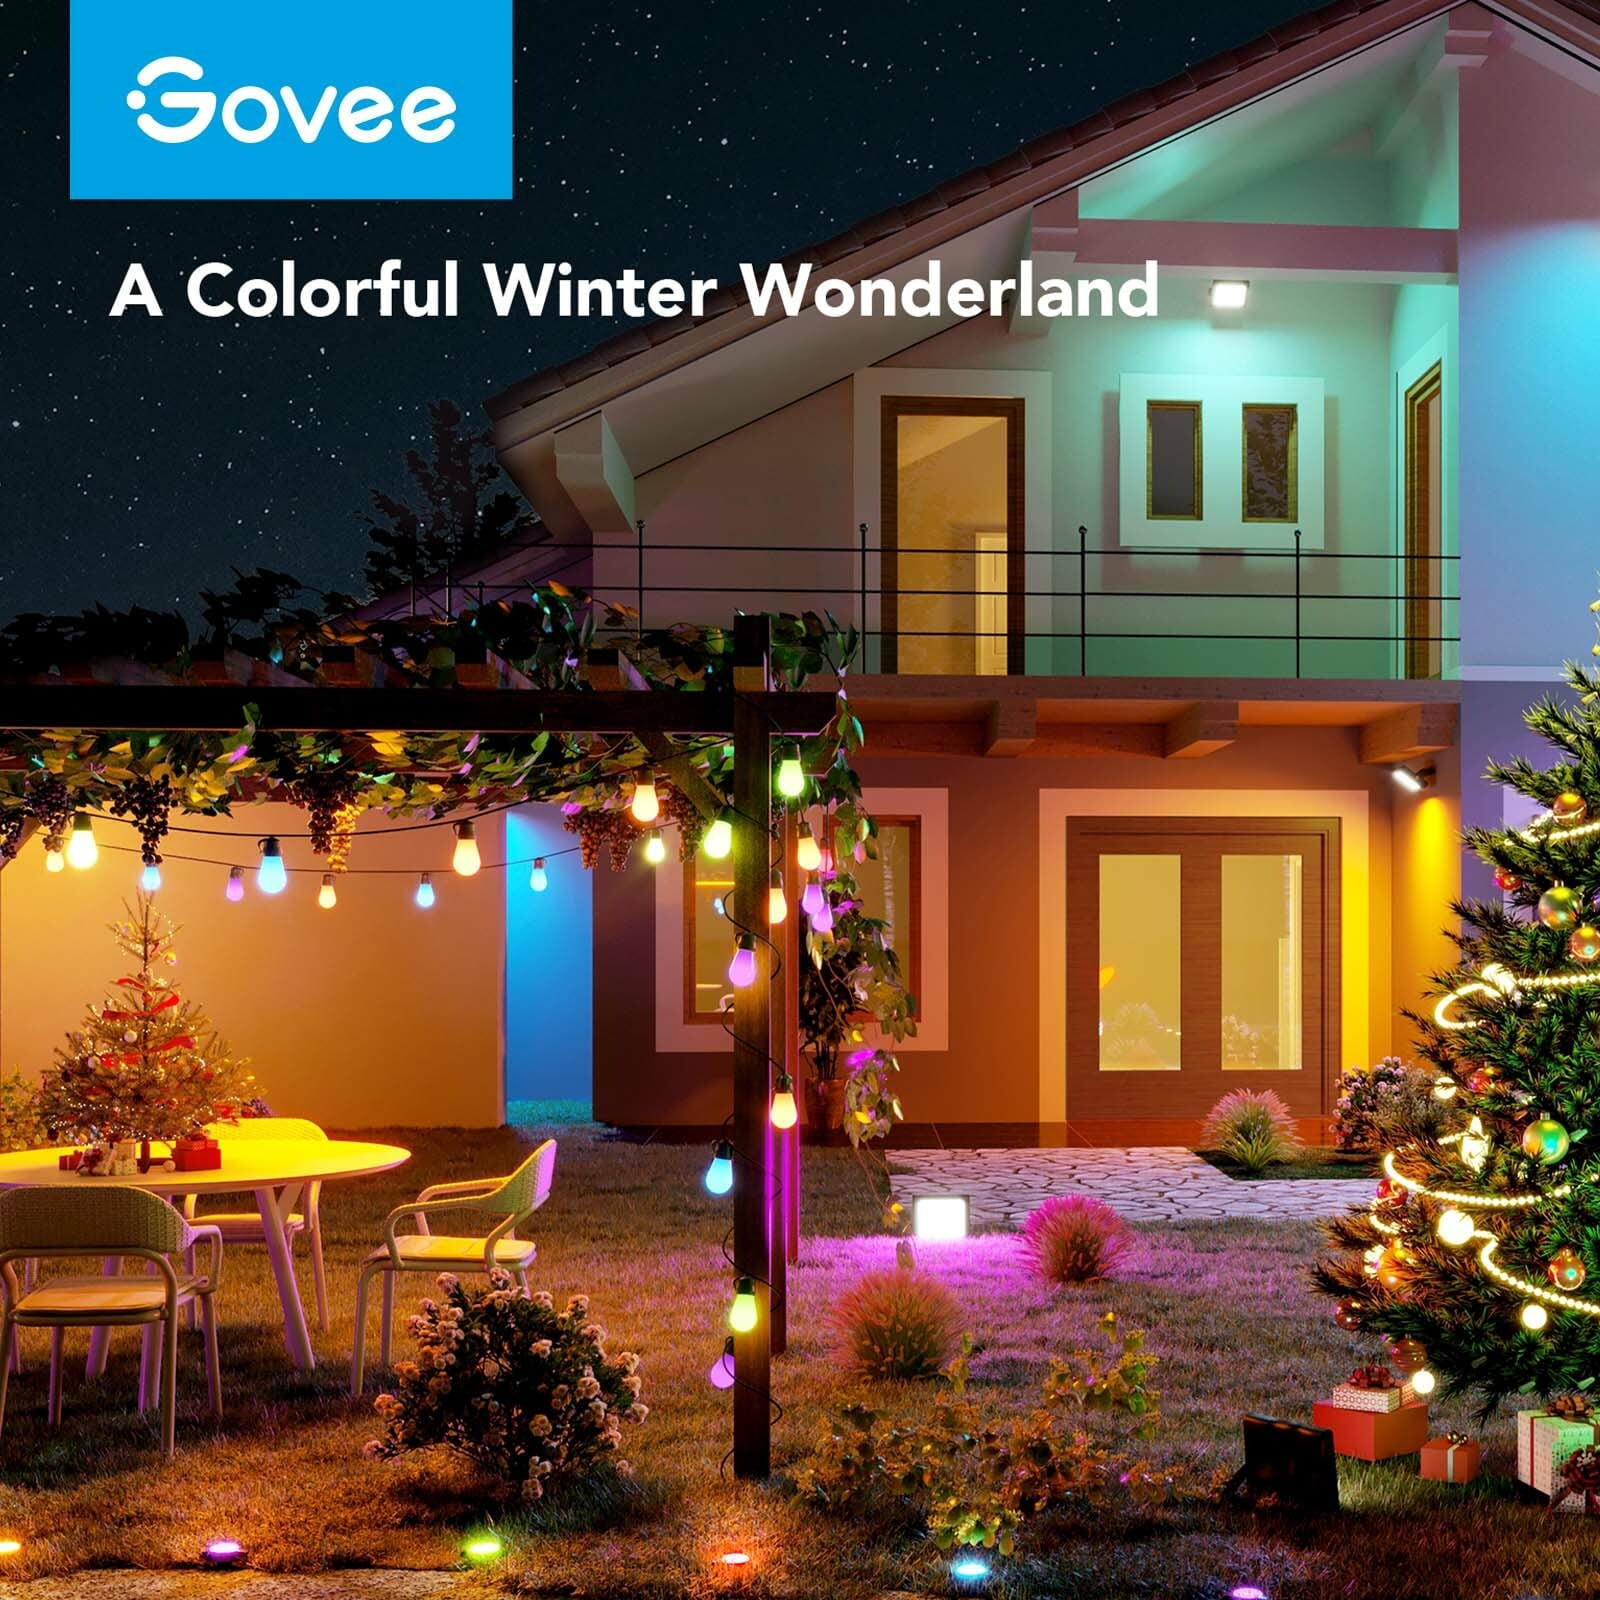 Govee WiFi Smart Outdoor String Light review - Reviewed